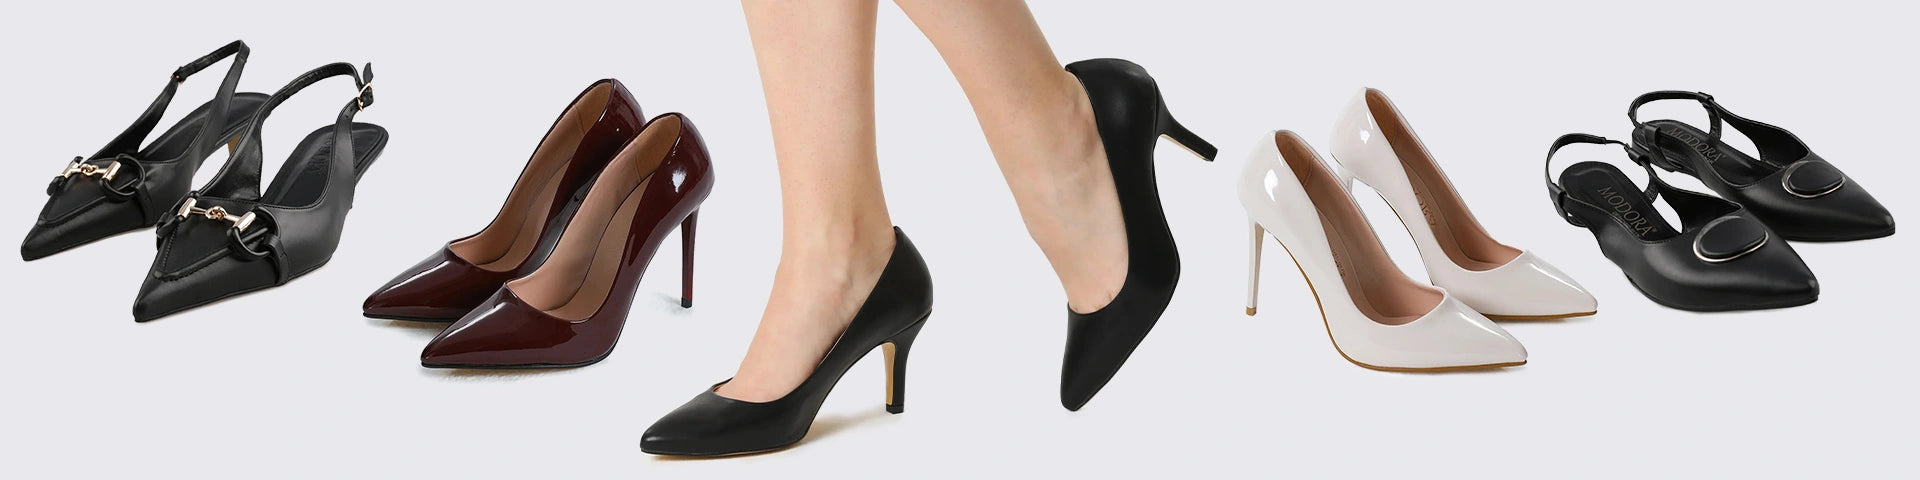 Pointed Heels for Women UK